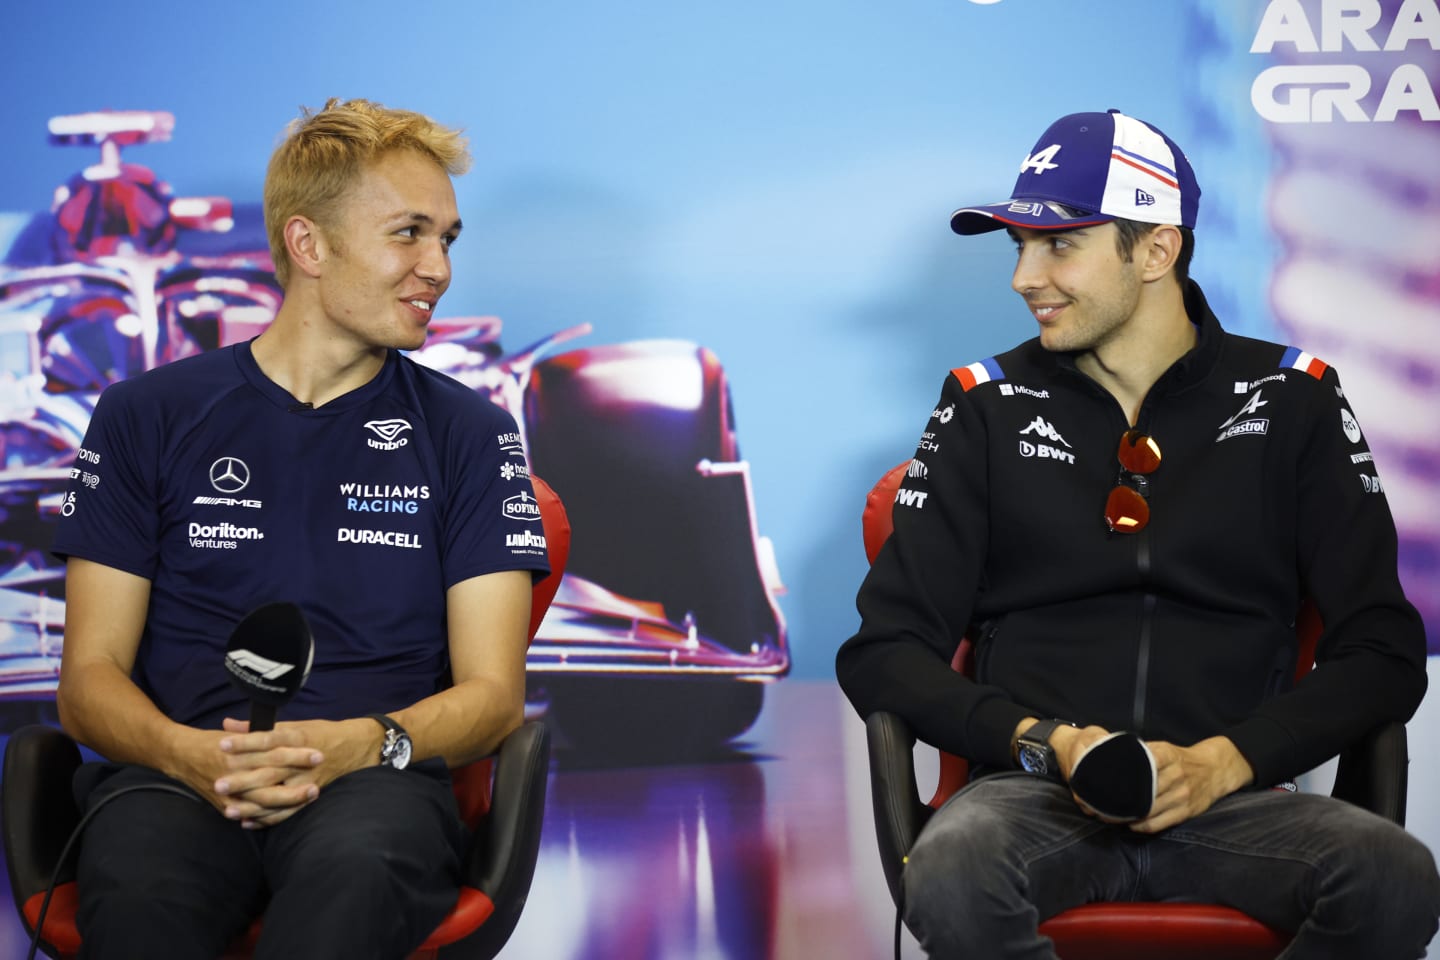 AUSTIN, TEXAS - OCTOBER 20: Alexander Albon of Thailand and Williams and Esteban Ocon of France and Alpine F1 talk in the Drivers Press Conference during previews ahead of the F1 Grand Prix of USA at Circuit of The Americas on October 20, 2022 in Austin, Texas. (Photo by Jared C. Tilton/Getty Images)